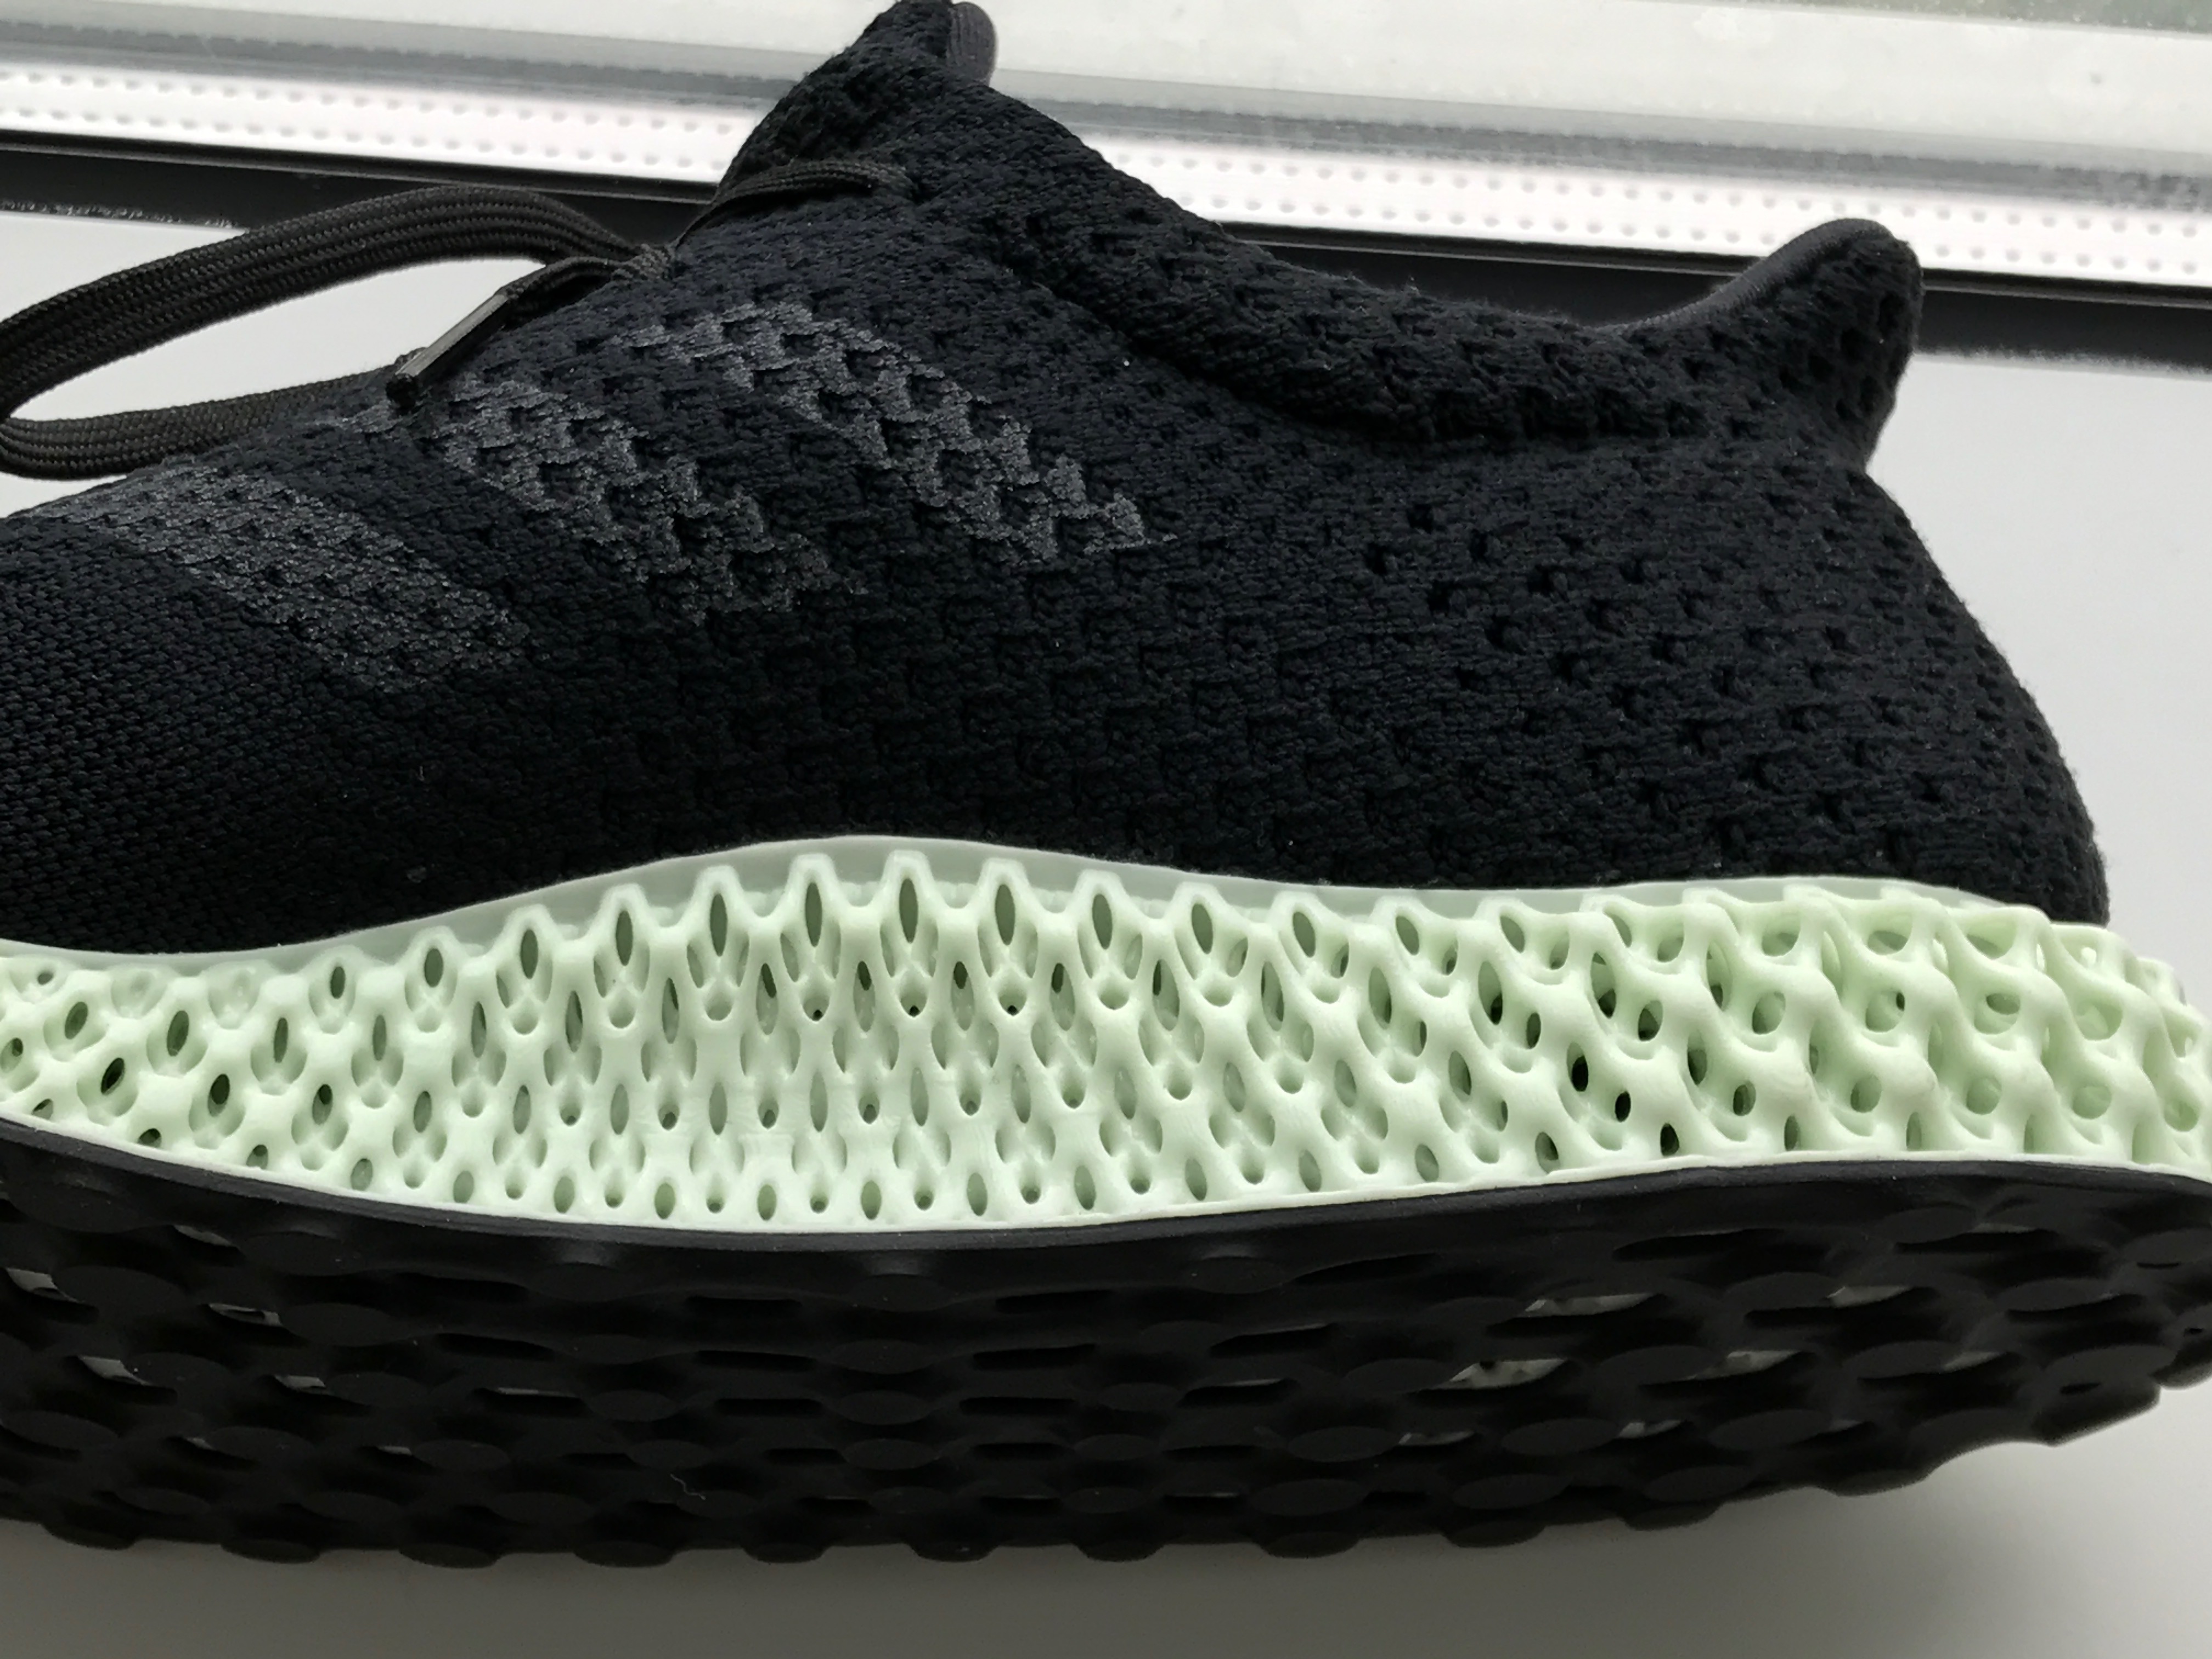 Adidas joins Carbon's board as its 3D printed shoes finally drop |  TechCrunch